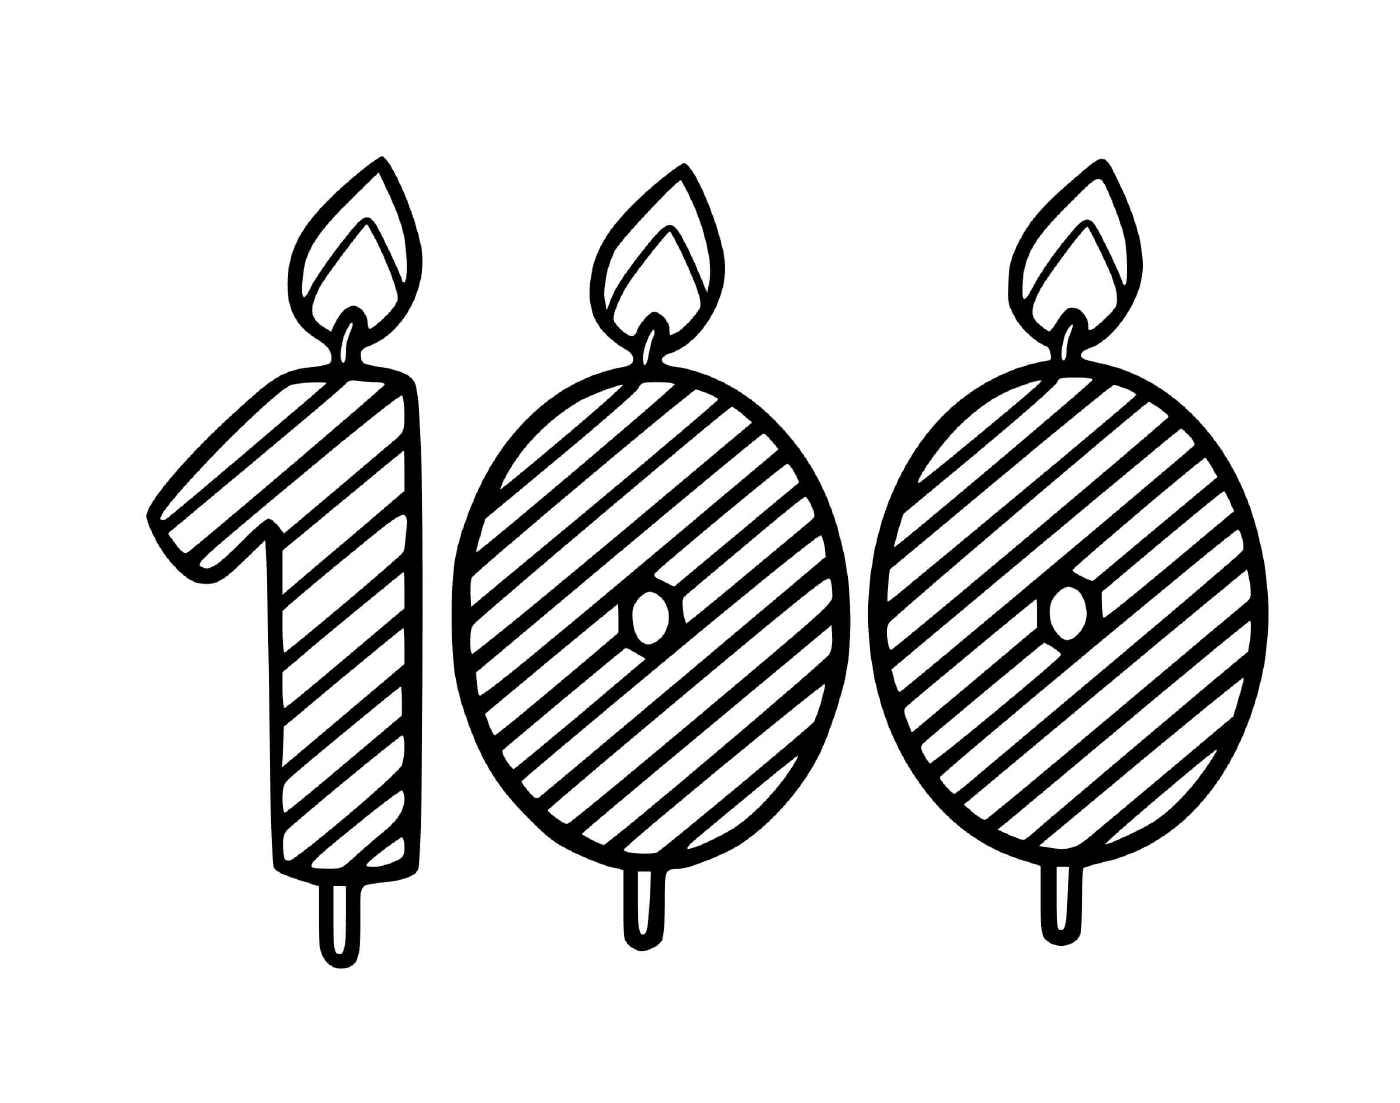  A set of candles indicating 1 0 0 